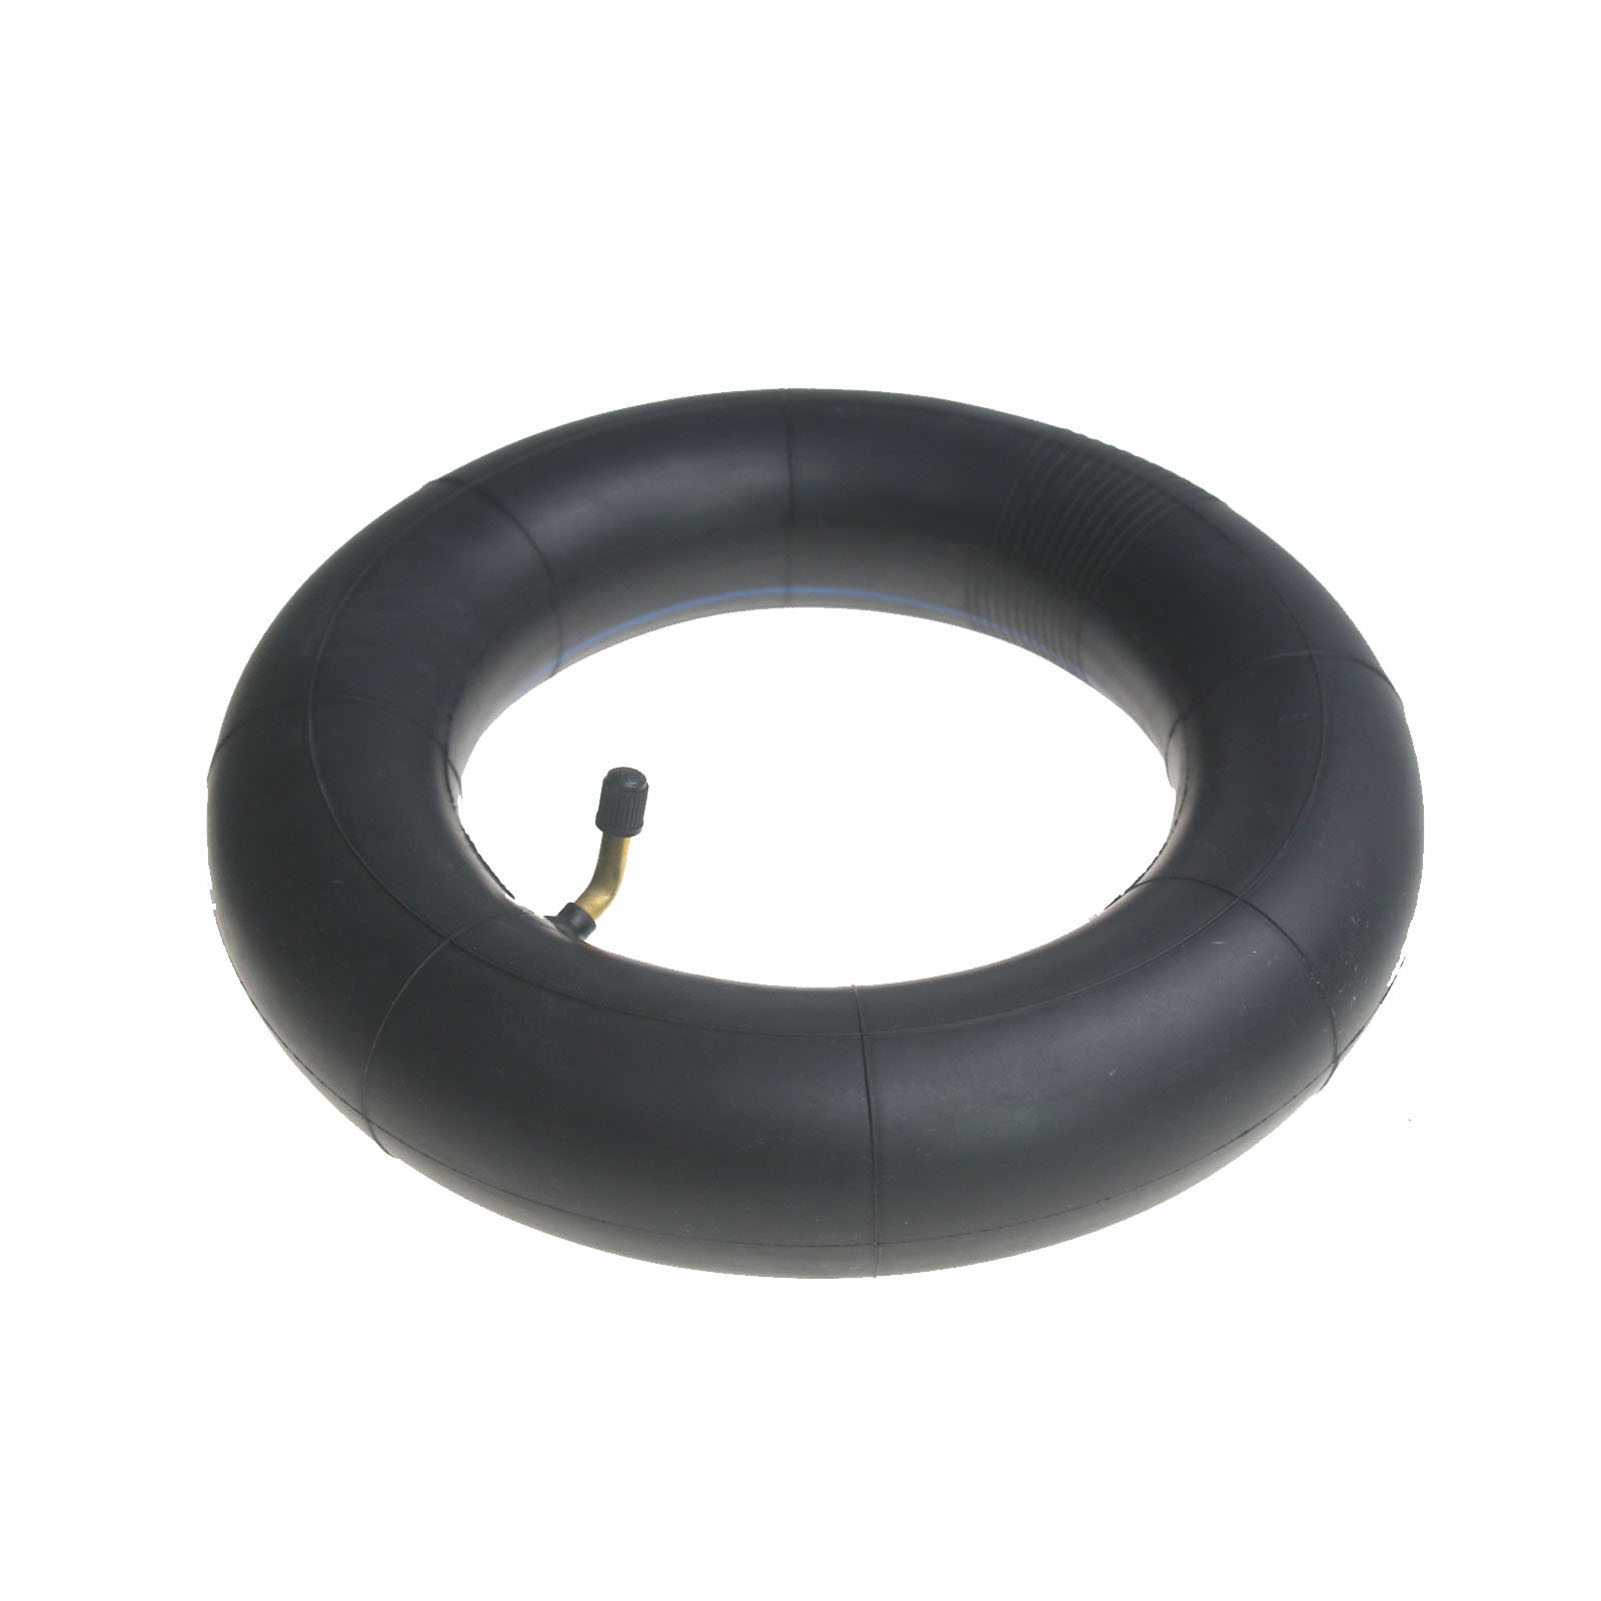 Thickened 10 * 3 Inner Tube Electric Scooter Tire 255 * 80 Inner Tube Suitable for 90/65-6.5 and 80/65-6.5 Tires 240mm Diameter Tire Electric Skateboard Inner Tube - image 1 of 5